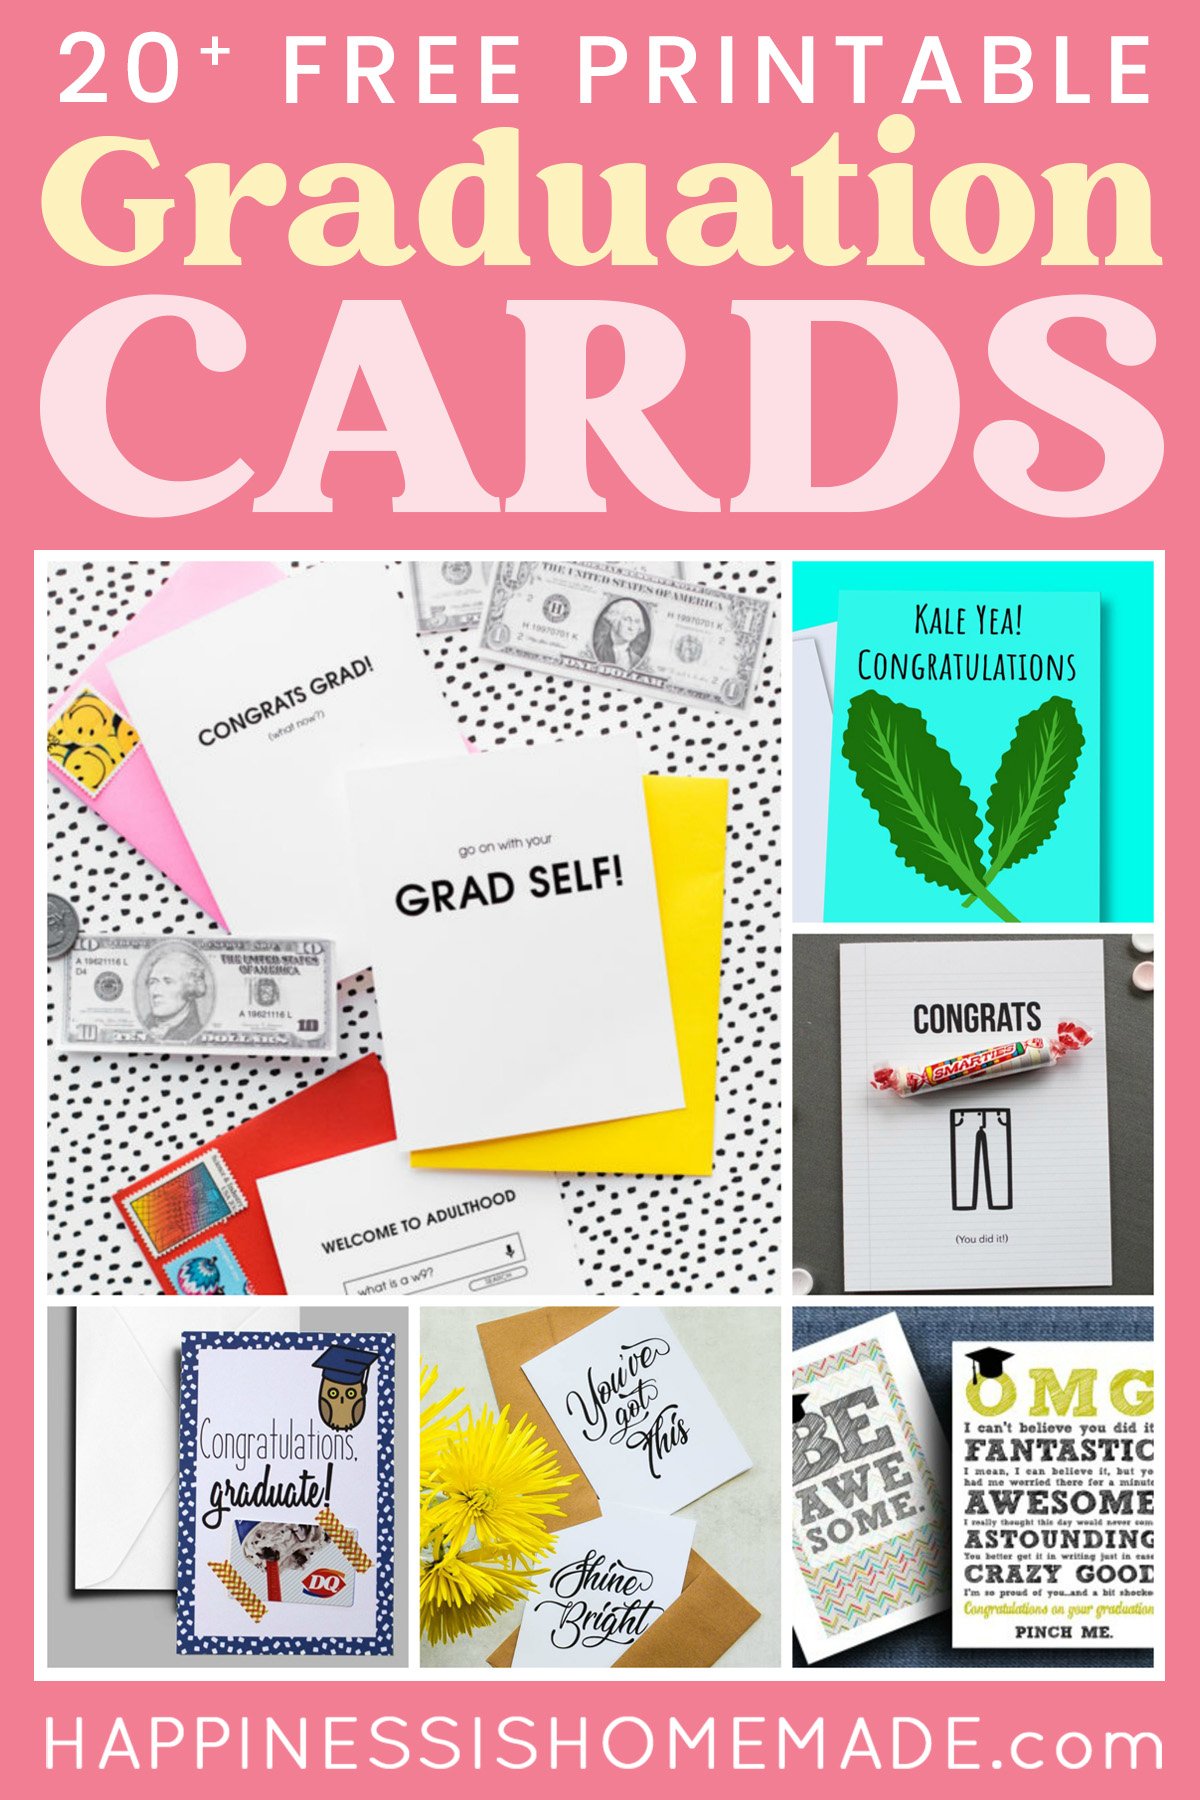 "20+ Free Printable Graduation Cards" graphic with collage image of graduation card options